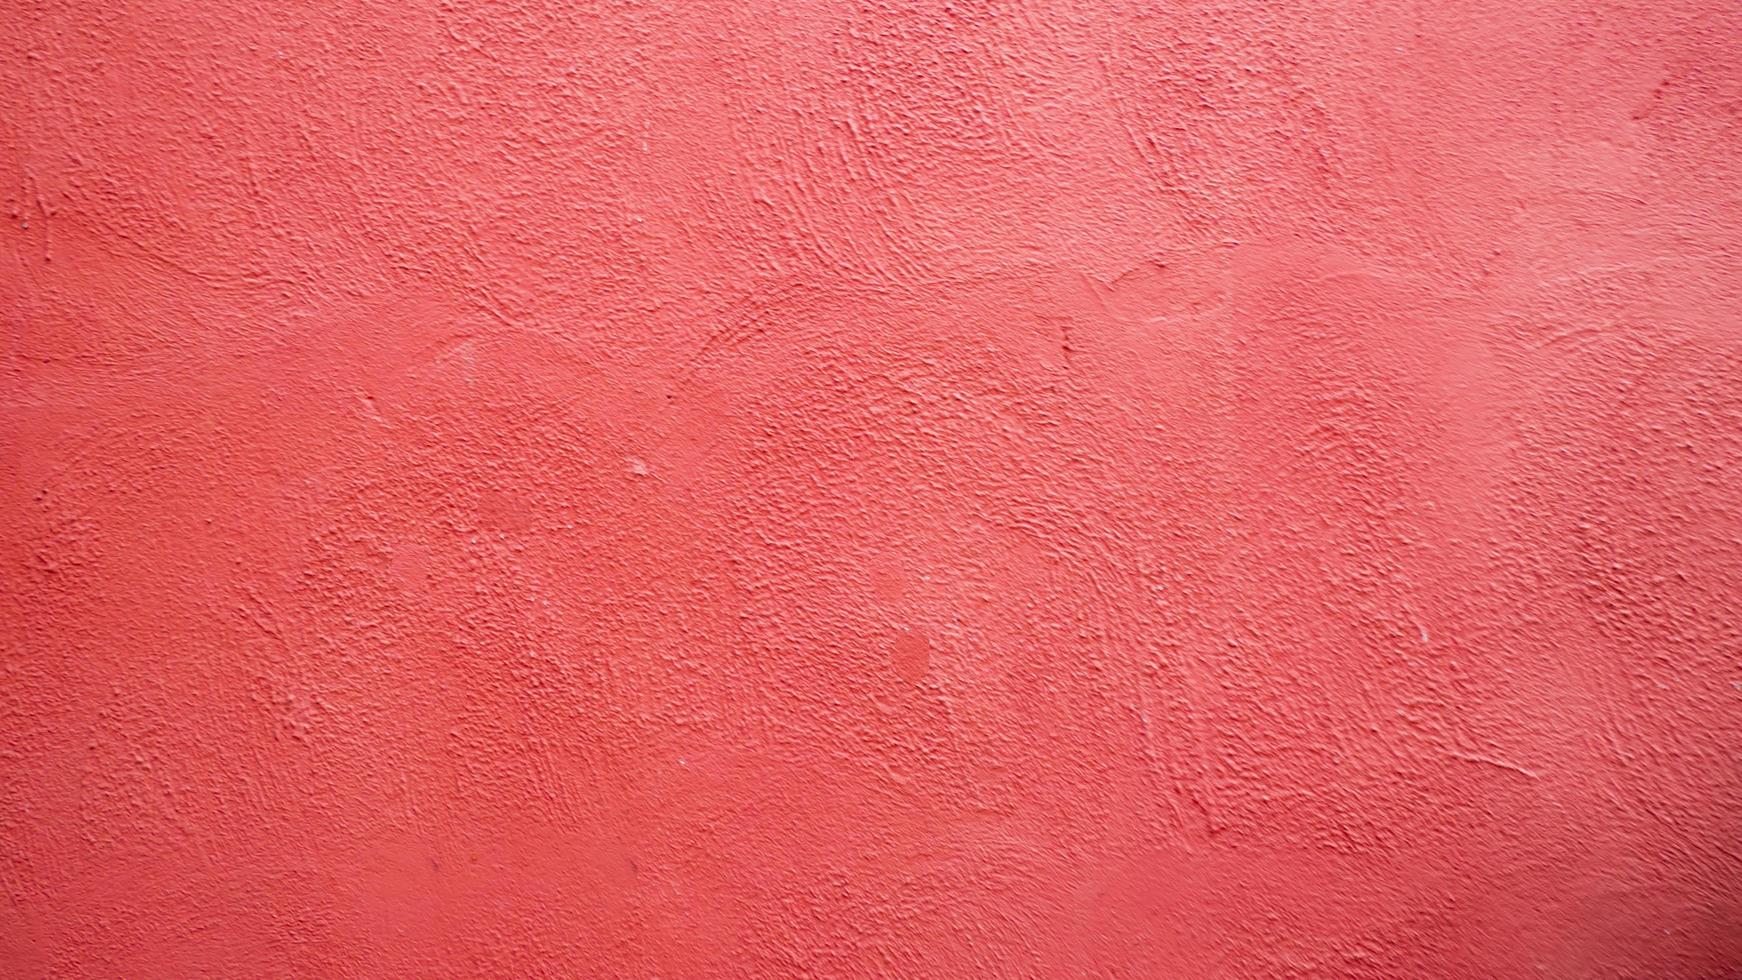 Rustic red wall photo